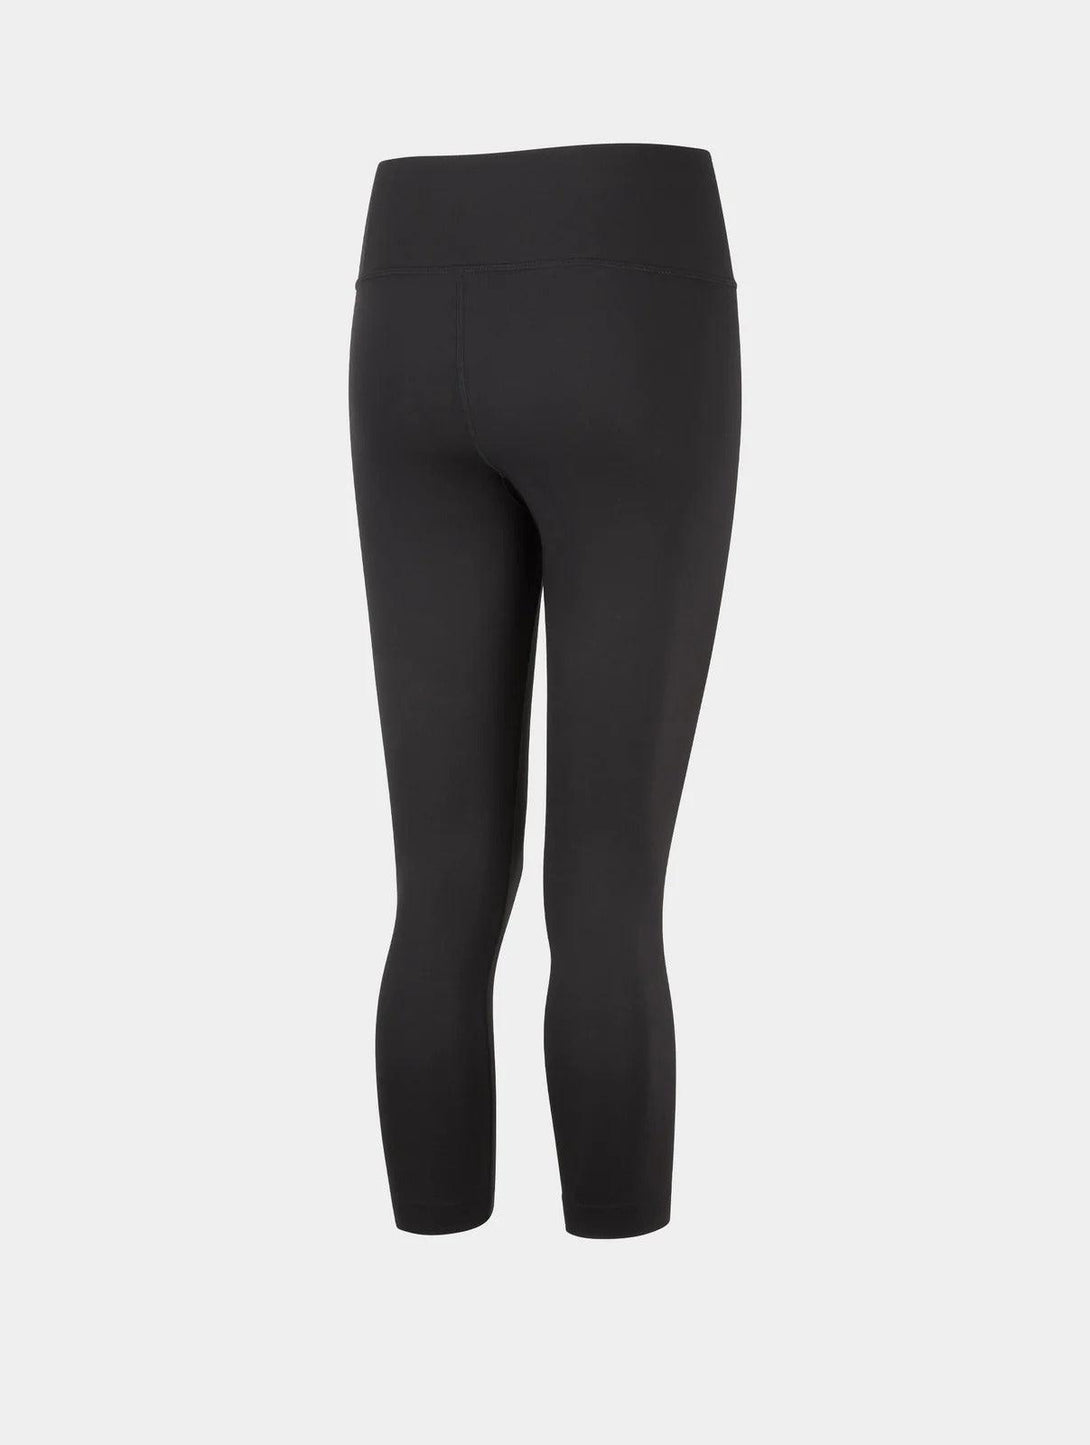 Ronhill Womens Core Crop Tight